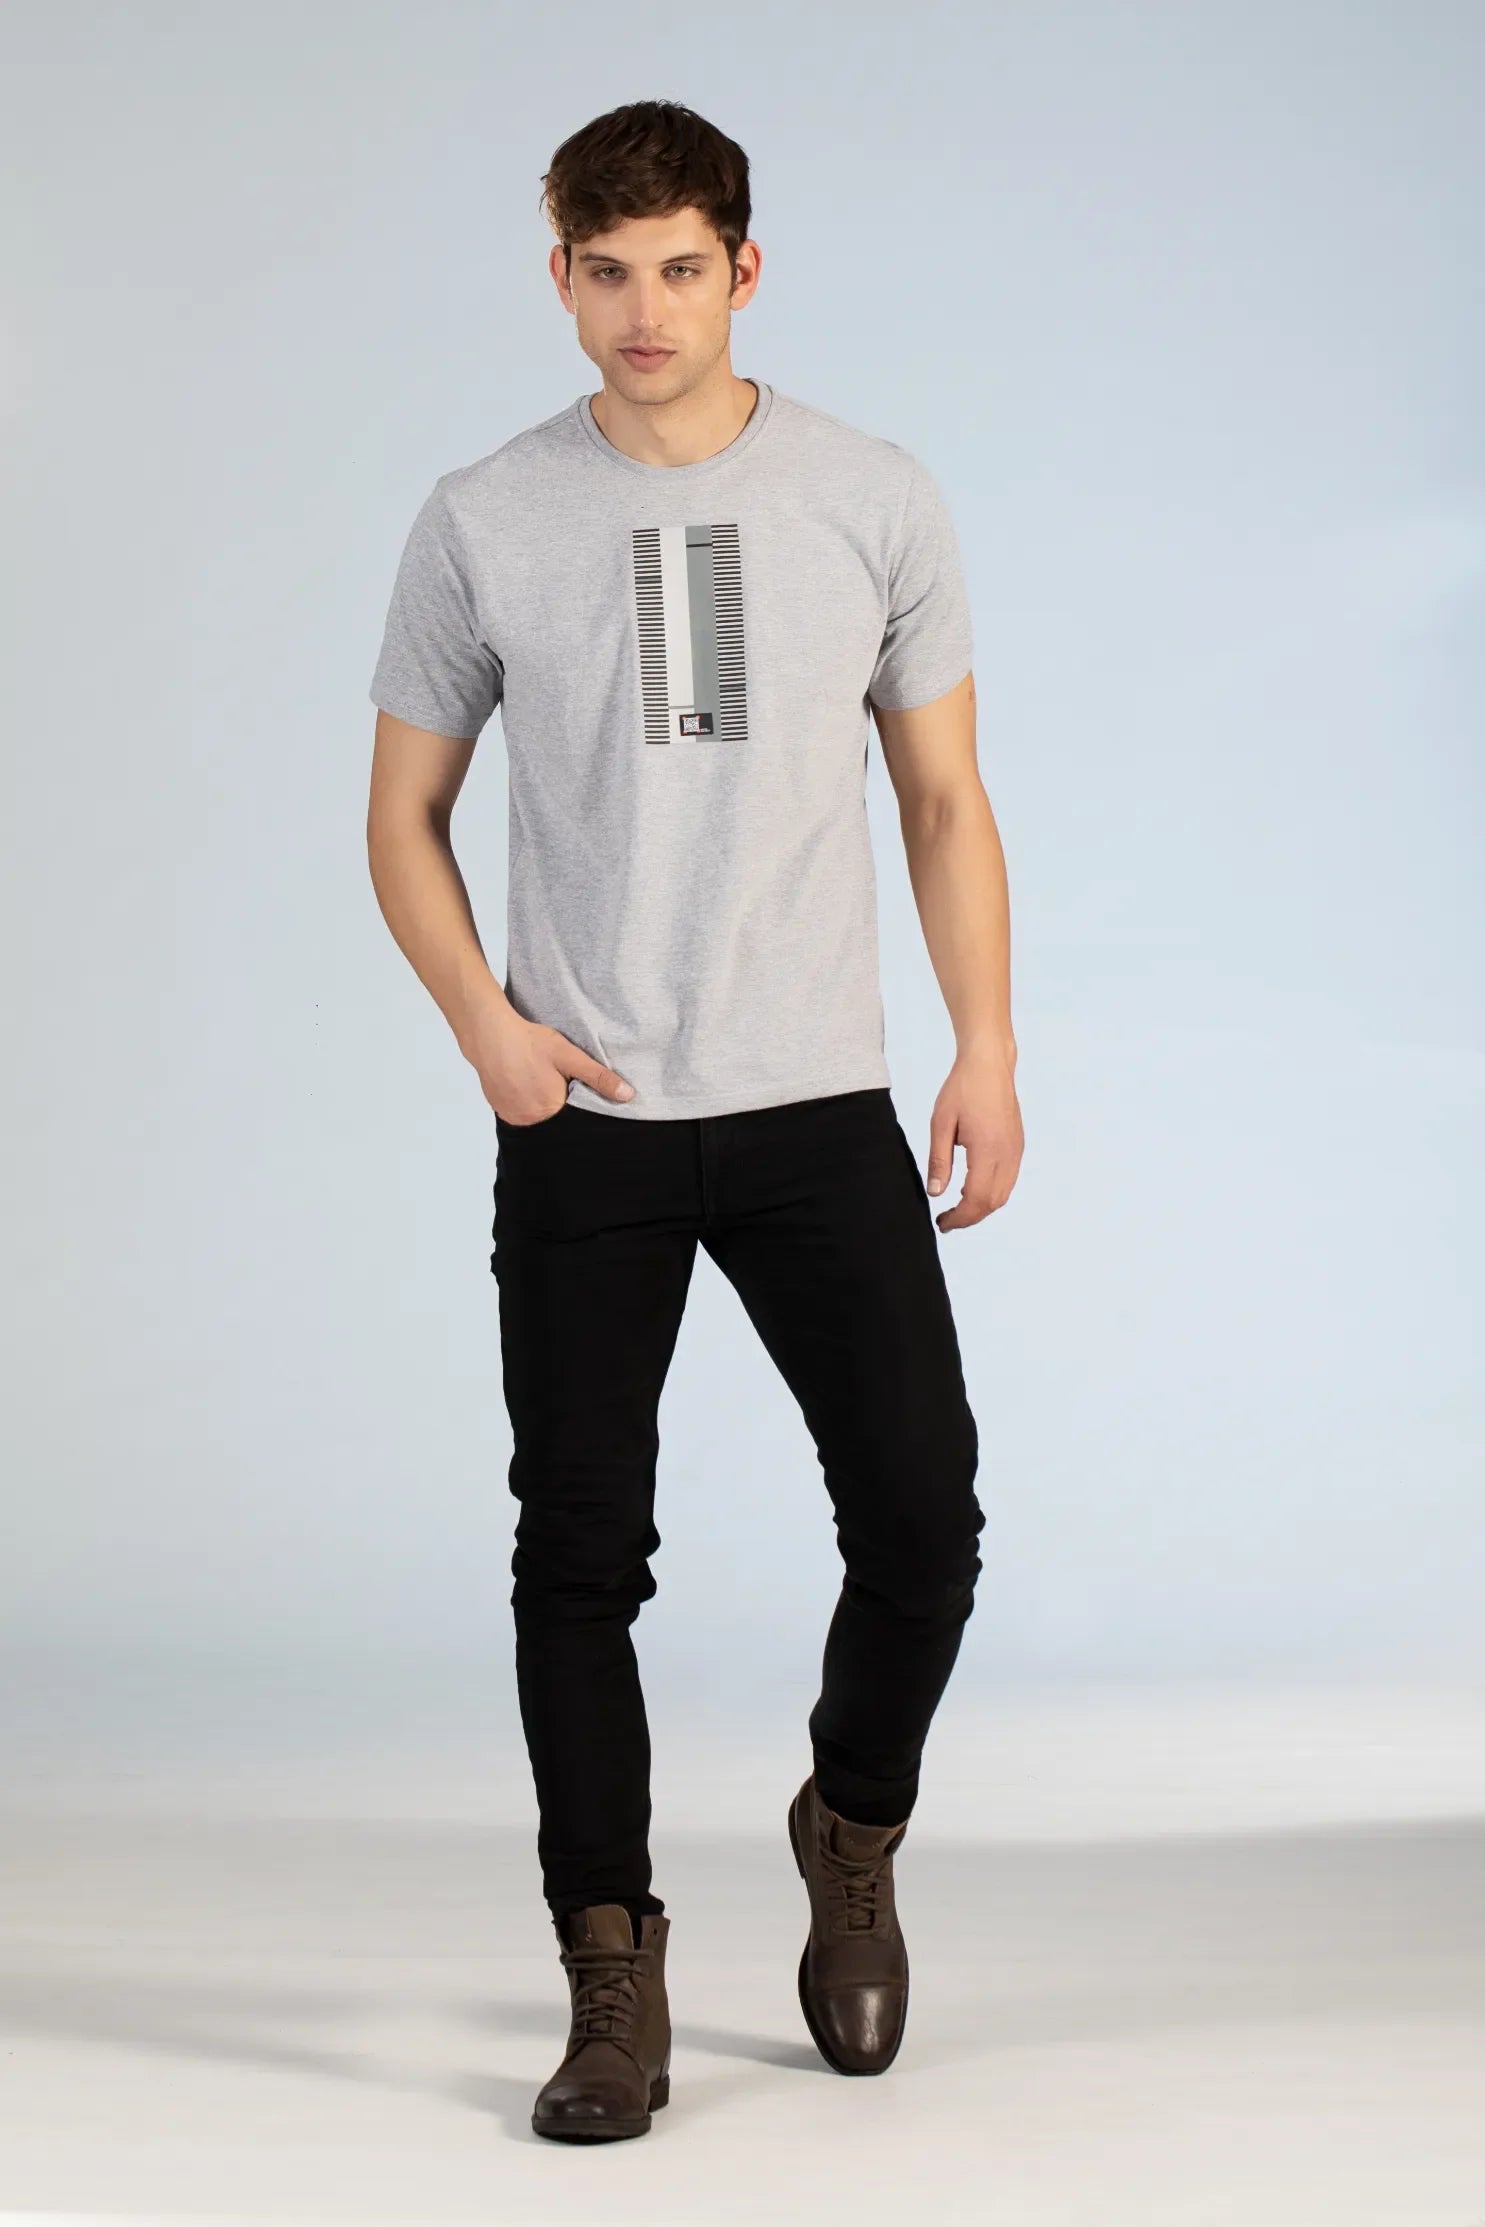 Buy Abstract Texture Print Round Neck T-Shirt Online.